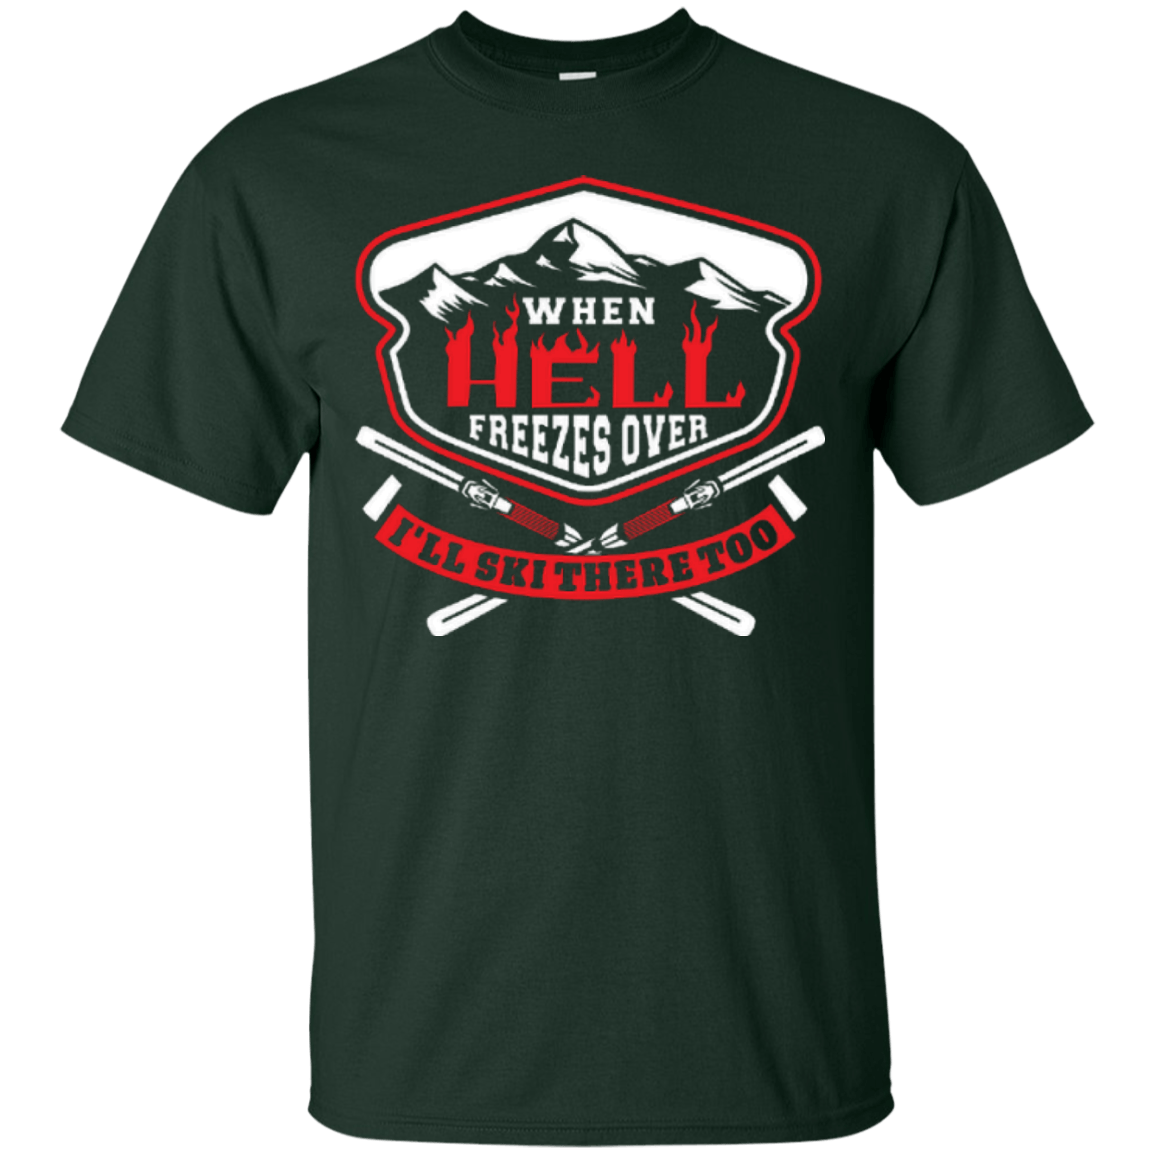 When Hell Freezes Over I'll Ski There Too Tees - Powderaddicts